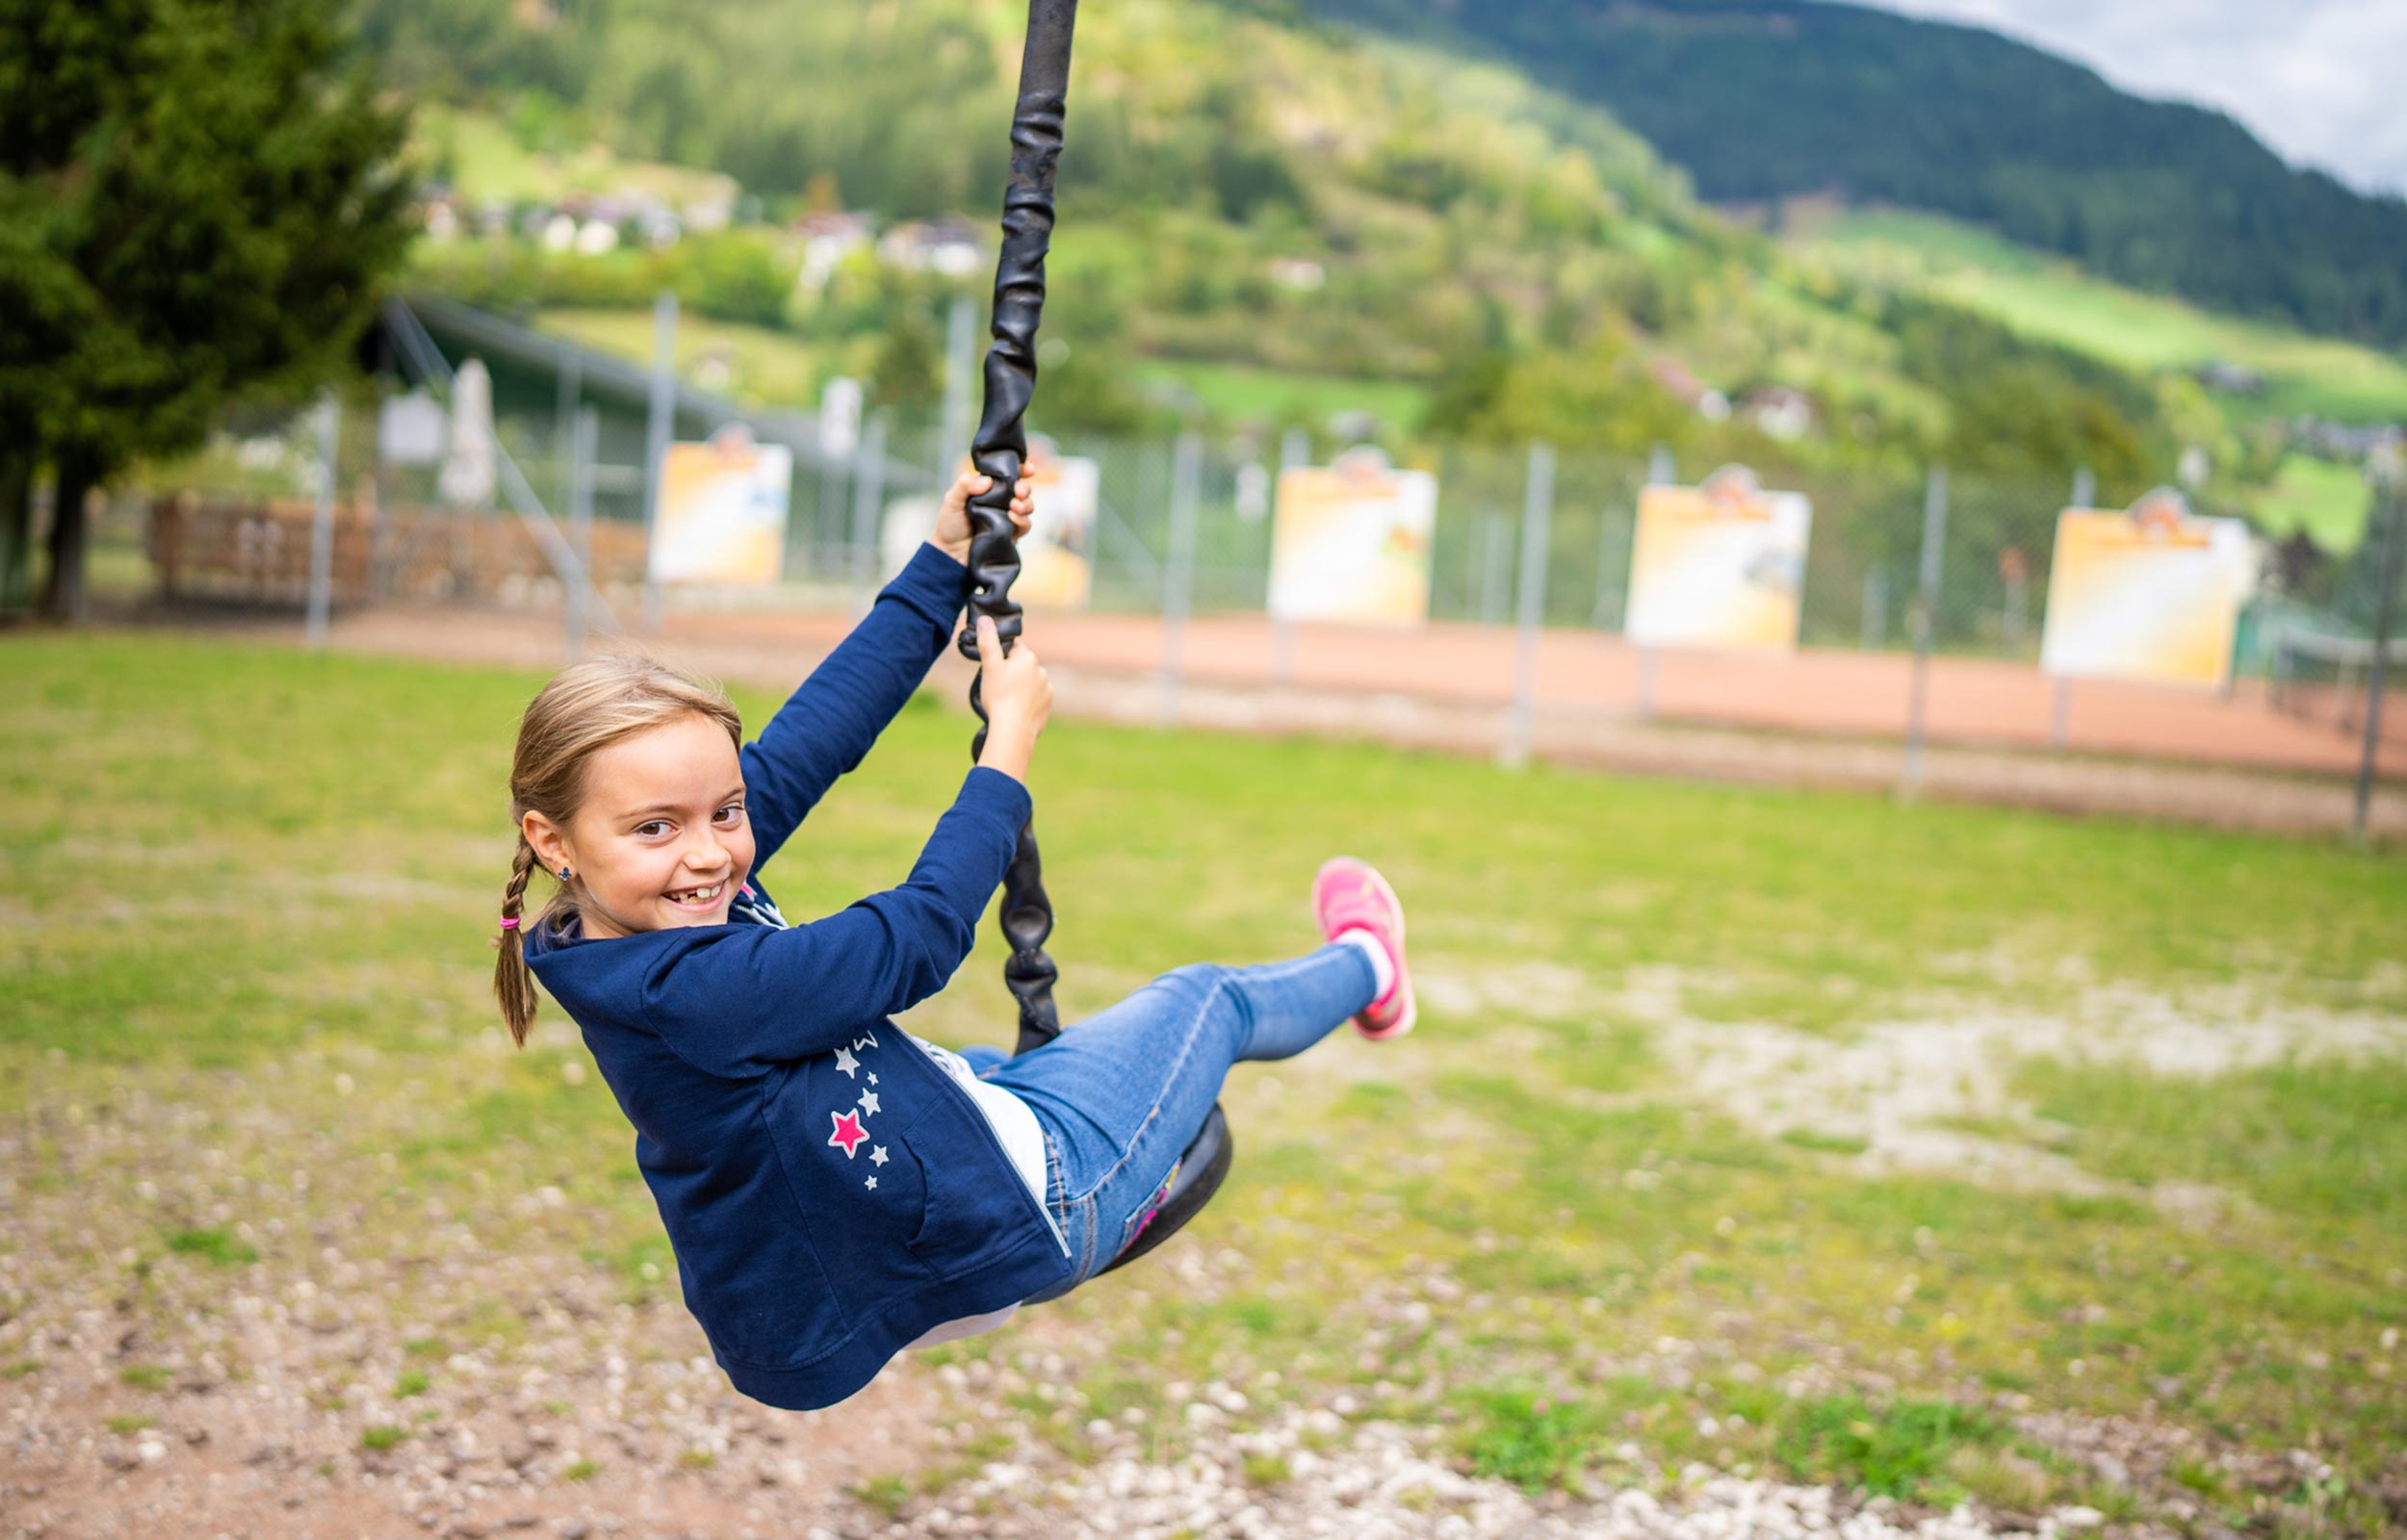 A girl in the playground is riding a zip wire.